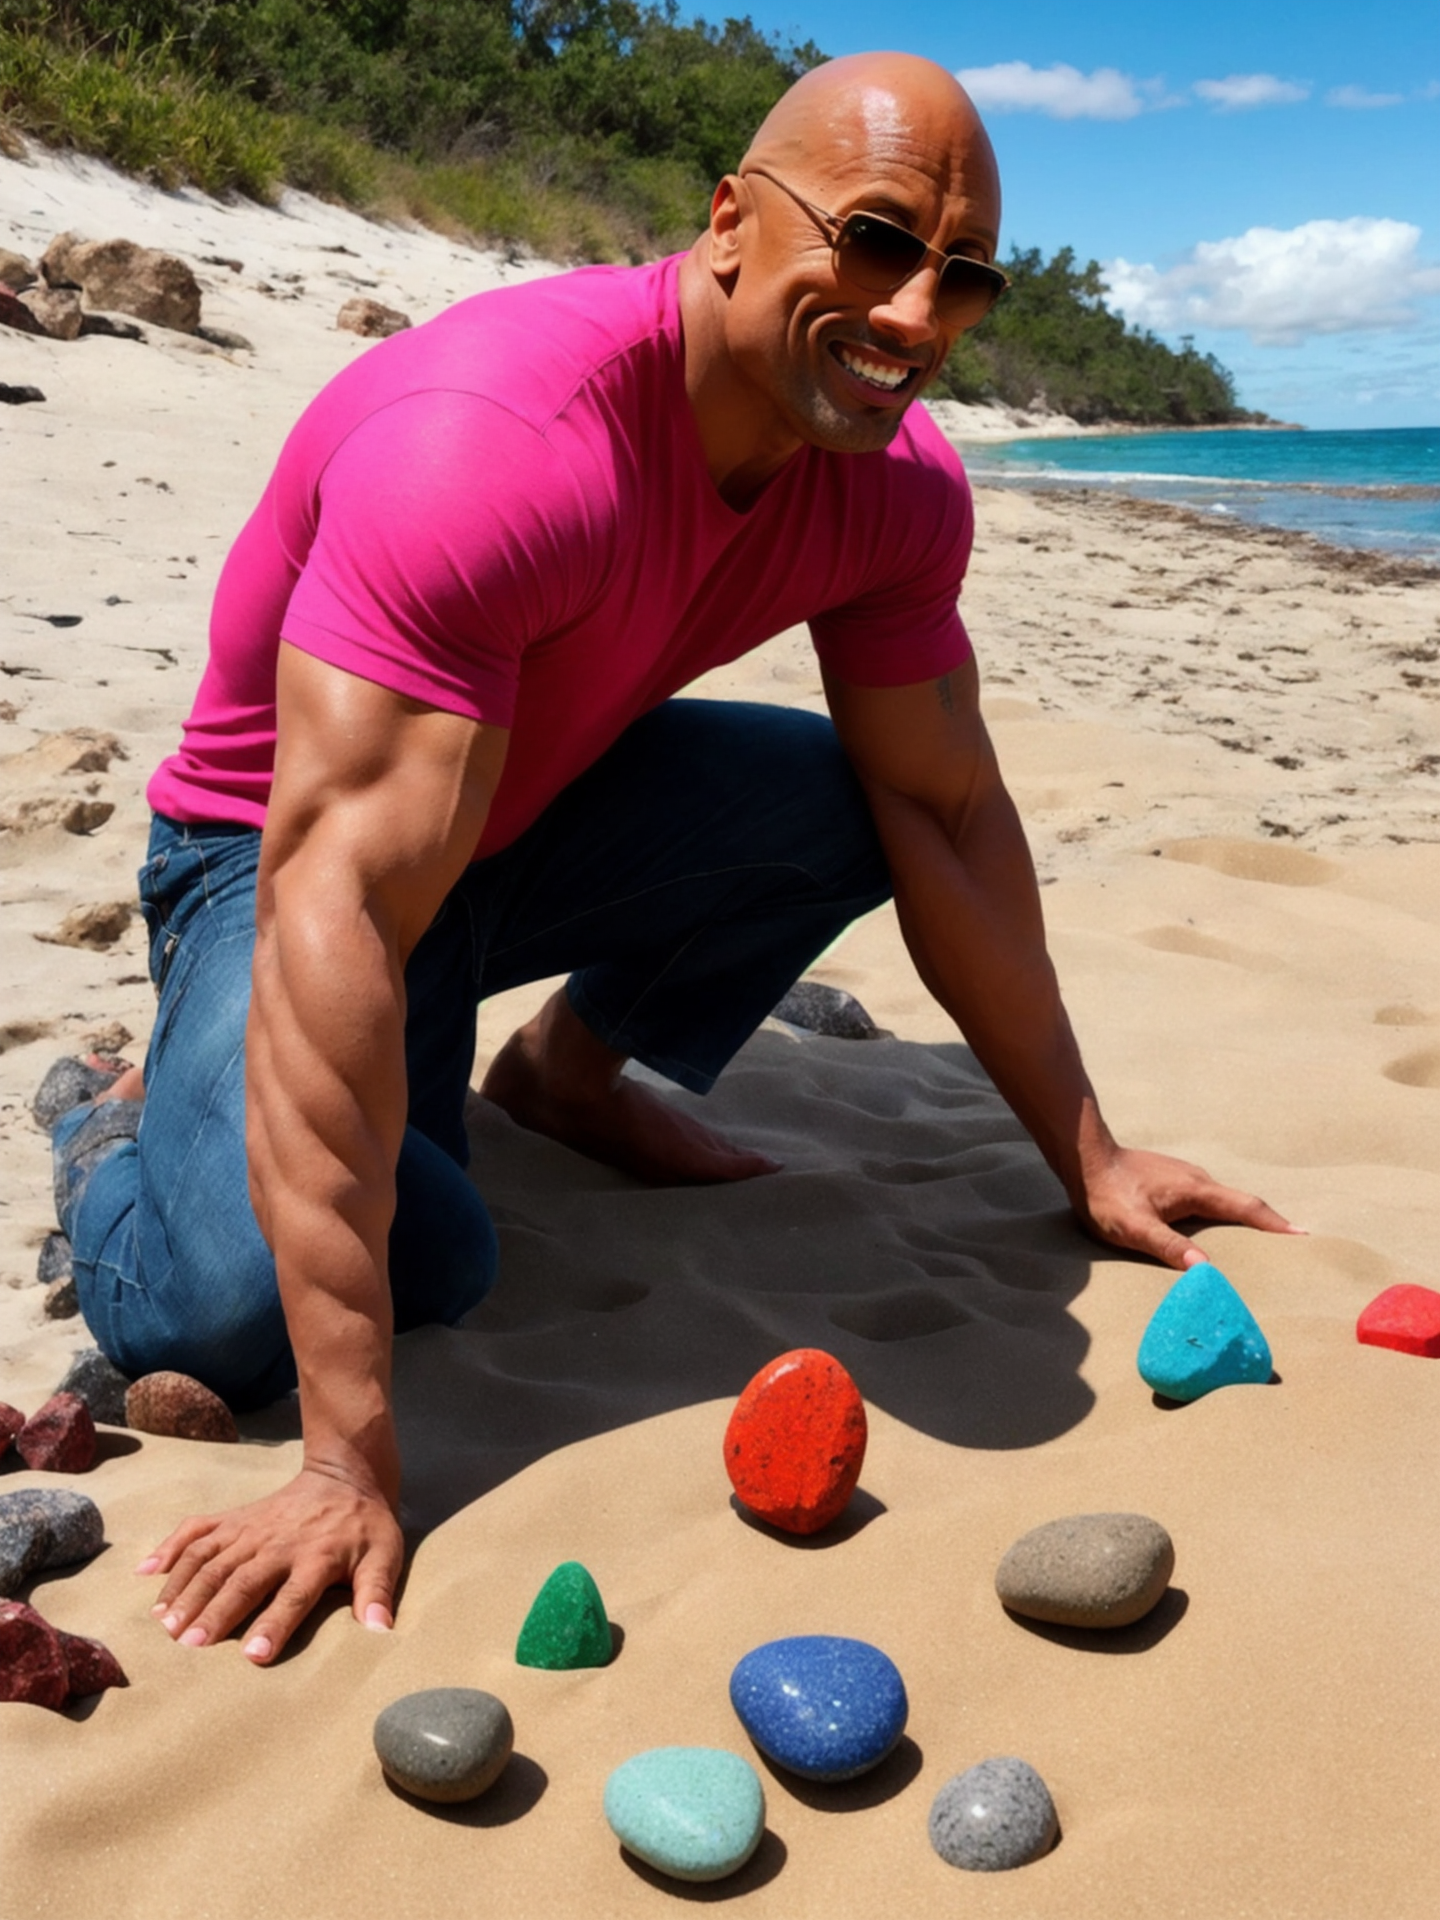 dwayne johnson the rock dressed up as a barbie playing with rocks on a beach